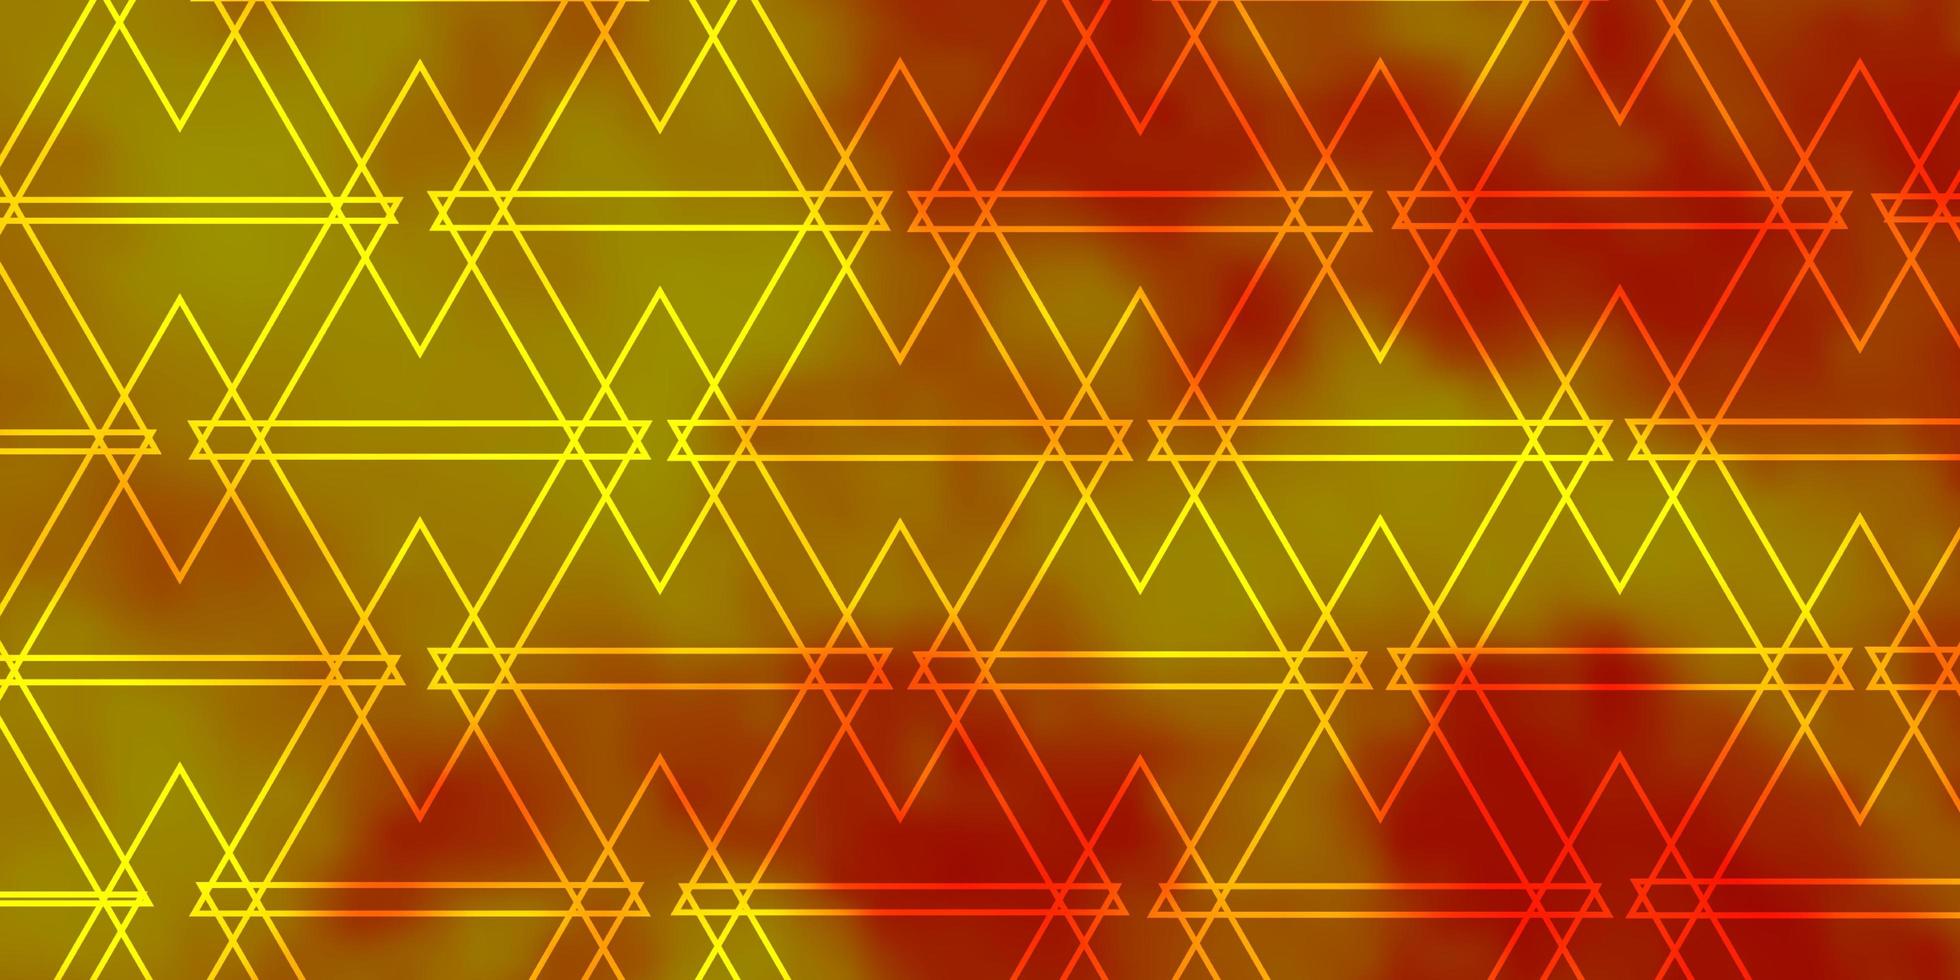 Light Orange vector background with lines, triangles.